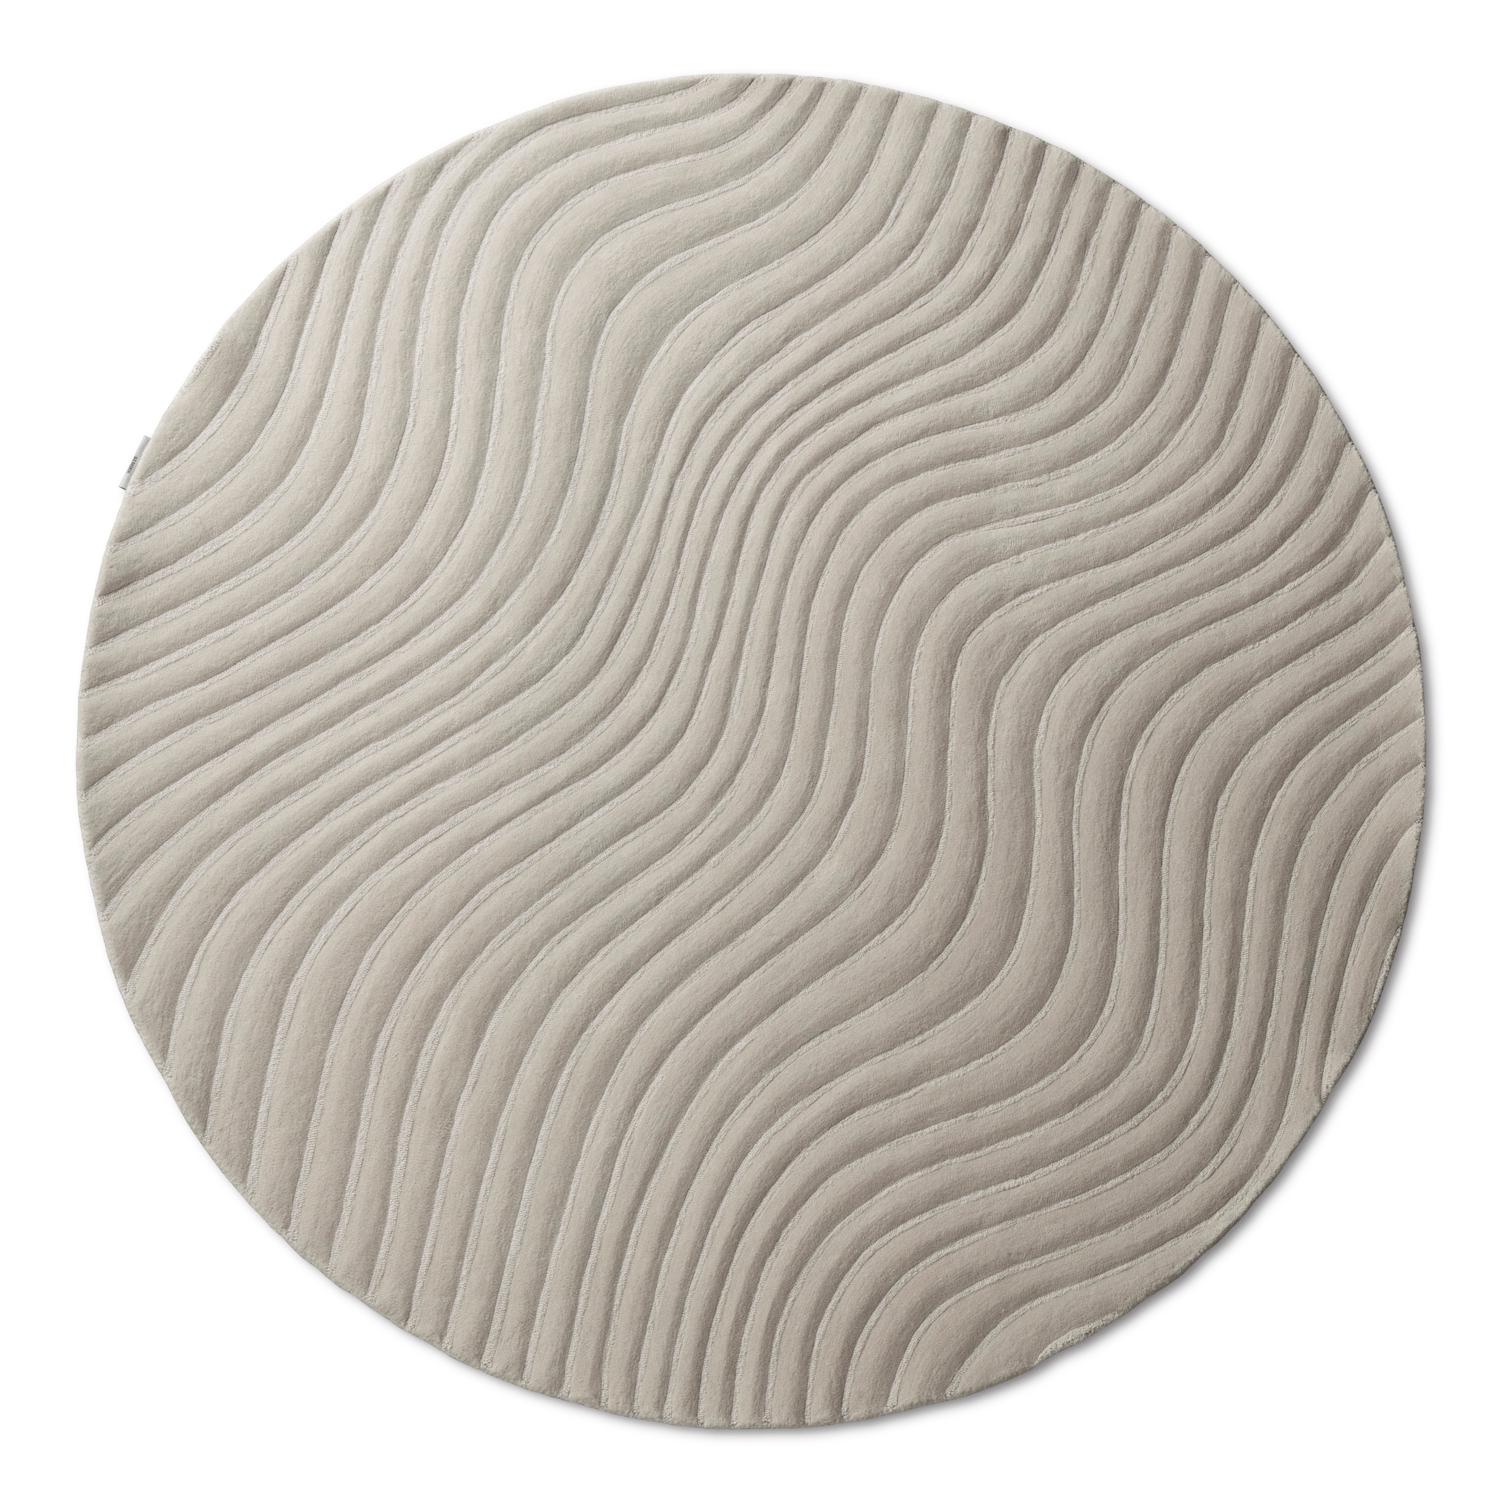 21st Cent Living Room Waves Wool Warm Grey Rug by Deanna Comellini ø 240 cm For Sale